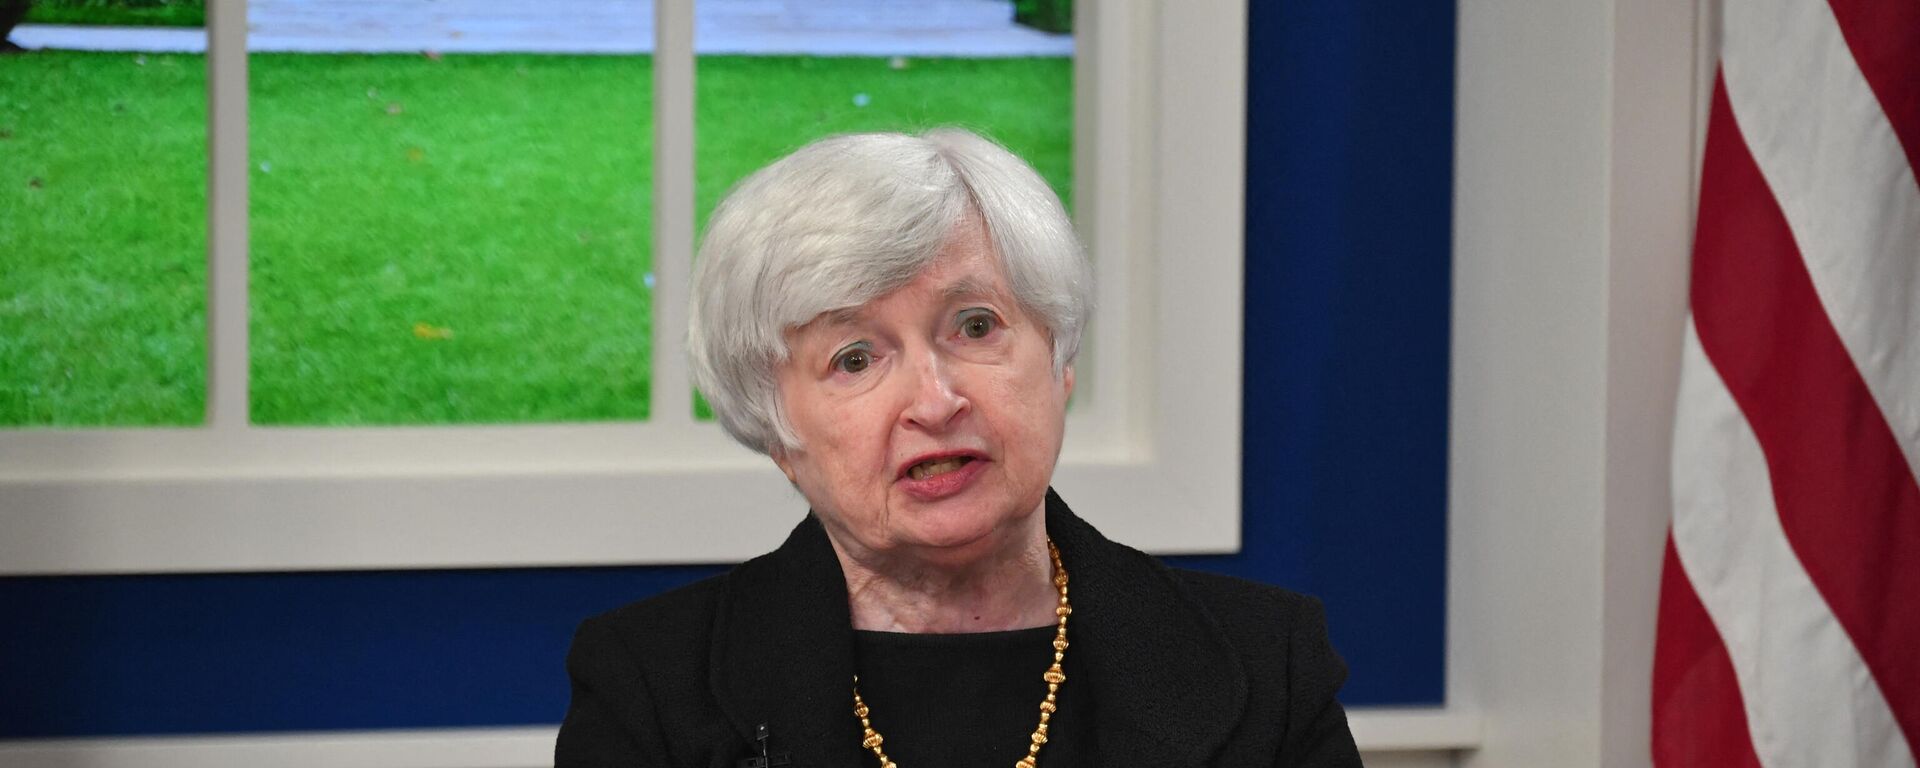 US Treasury Secretary Janet Yellen speaks during a meeting with business leaders and CEOs on the need to address the debt limit, on October 6, 2021, in the South Auditorium of the White House in Washington, DC. - Sputnik International, 1920, 20.06.2022